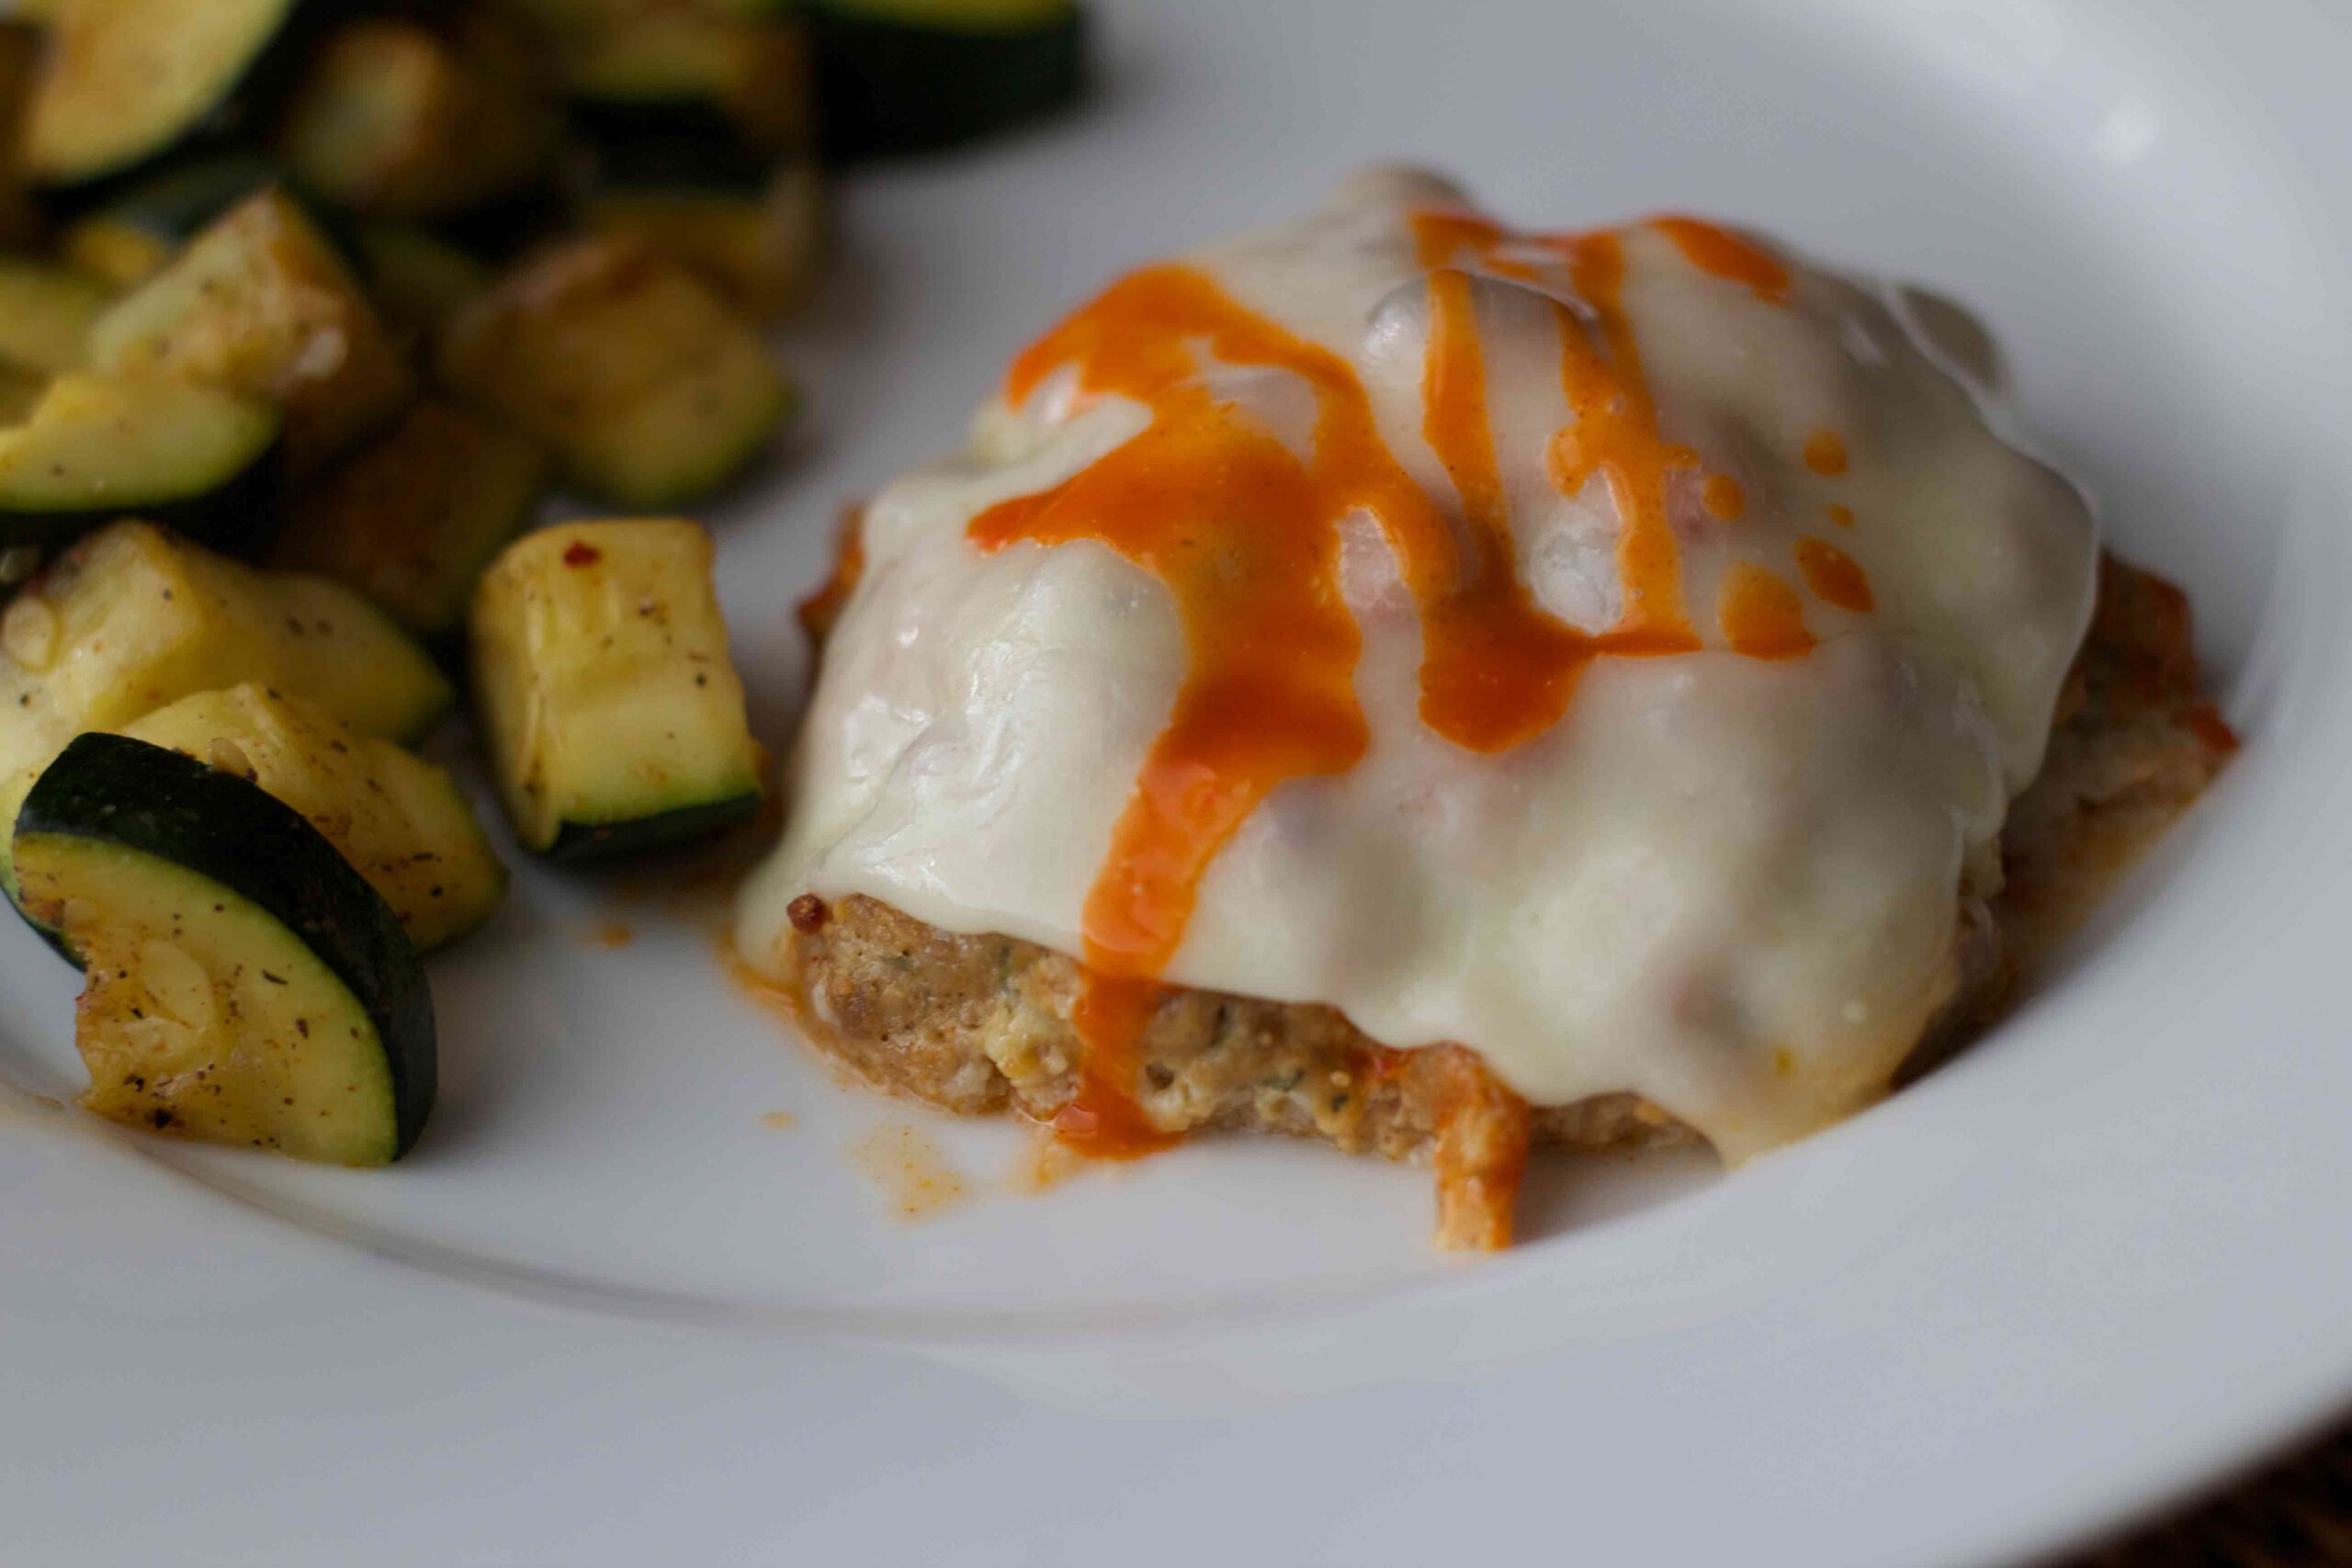 Buffalo Turkey Burger. Low carb and packed with flavor! Great after a bariatric surgery.